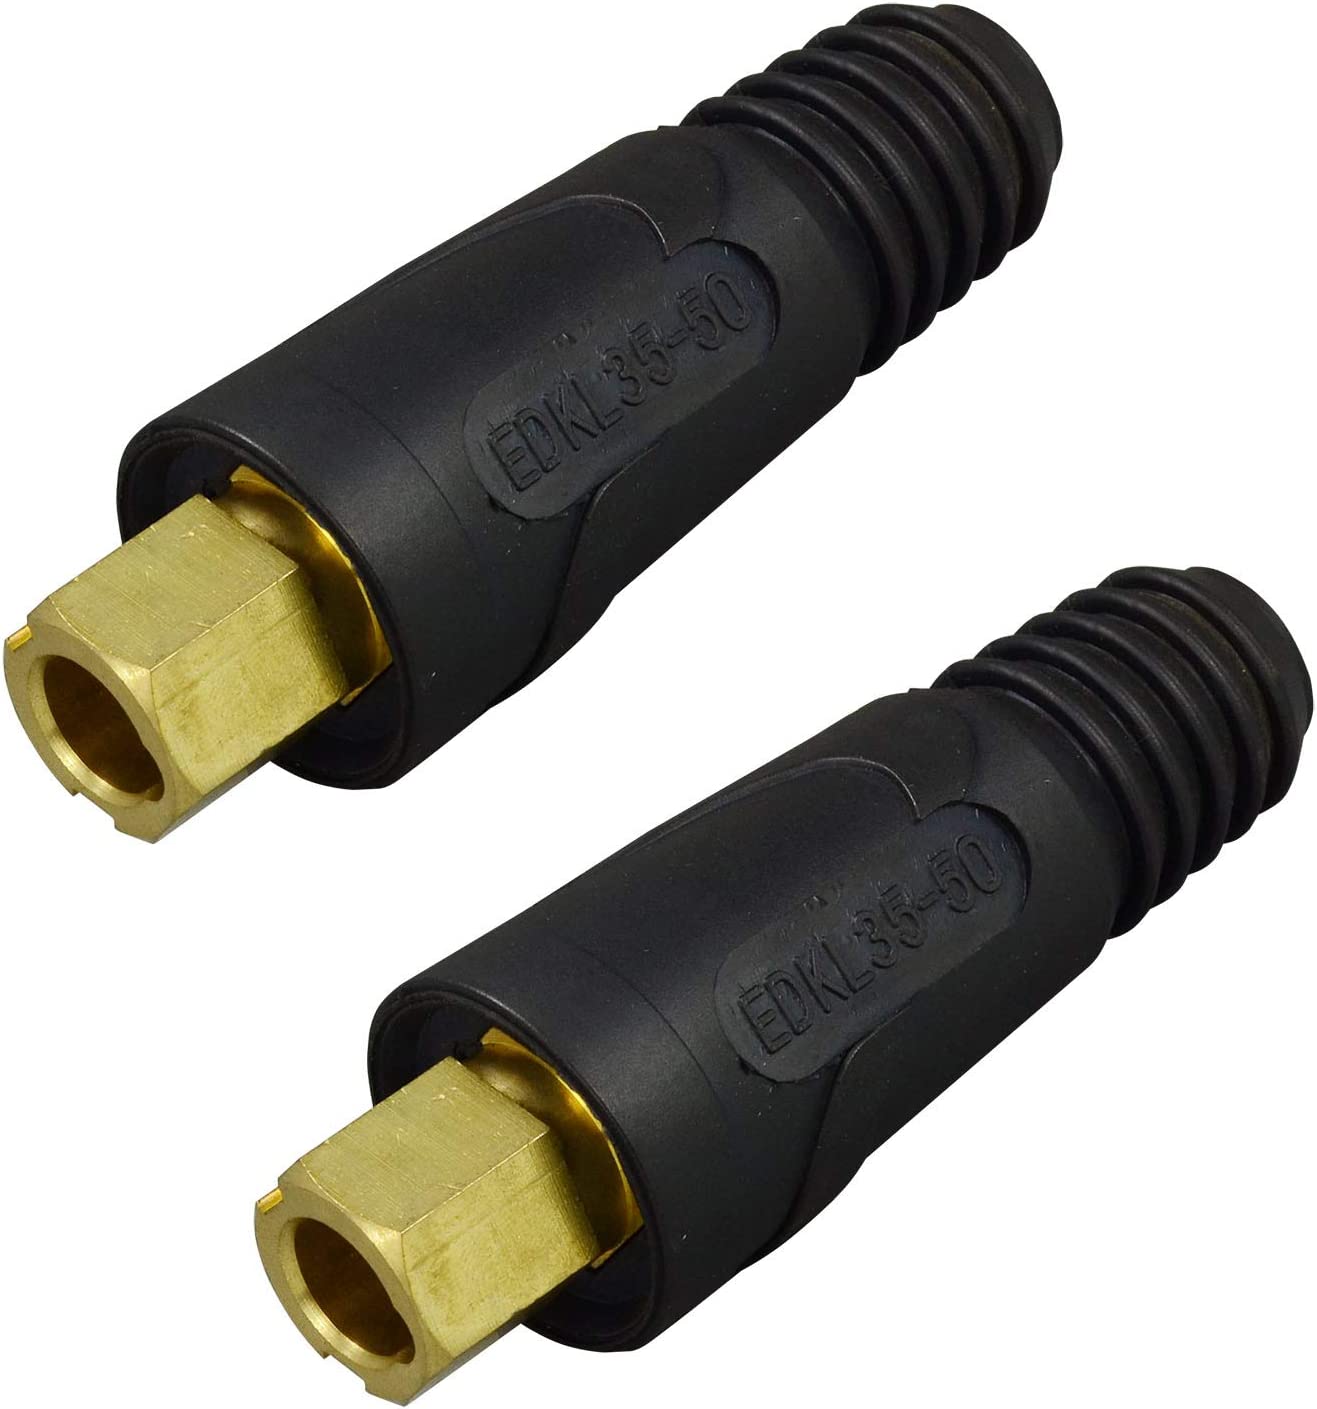 DINSE Welding Cable Joint Quick Connector Female DINSE-Style 200Amp-300Amp 35-50 SQ-MM 2pk 